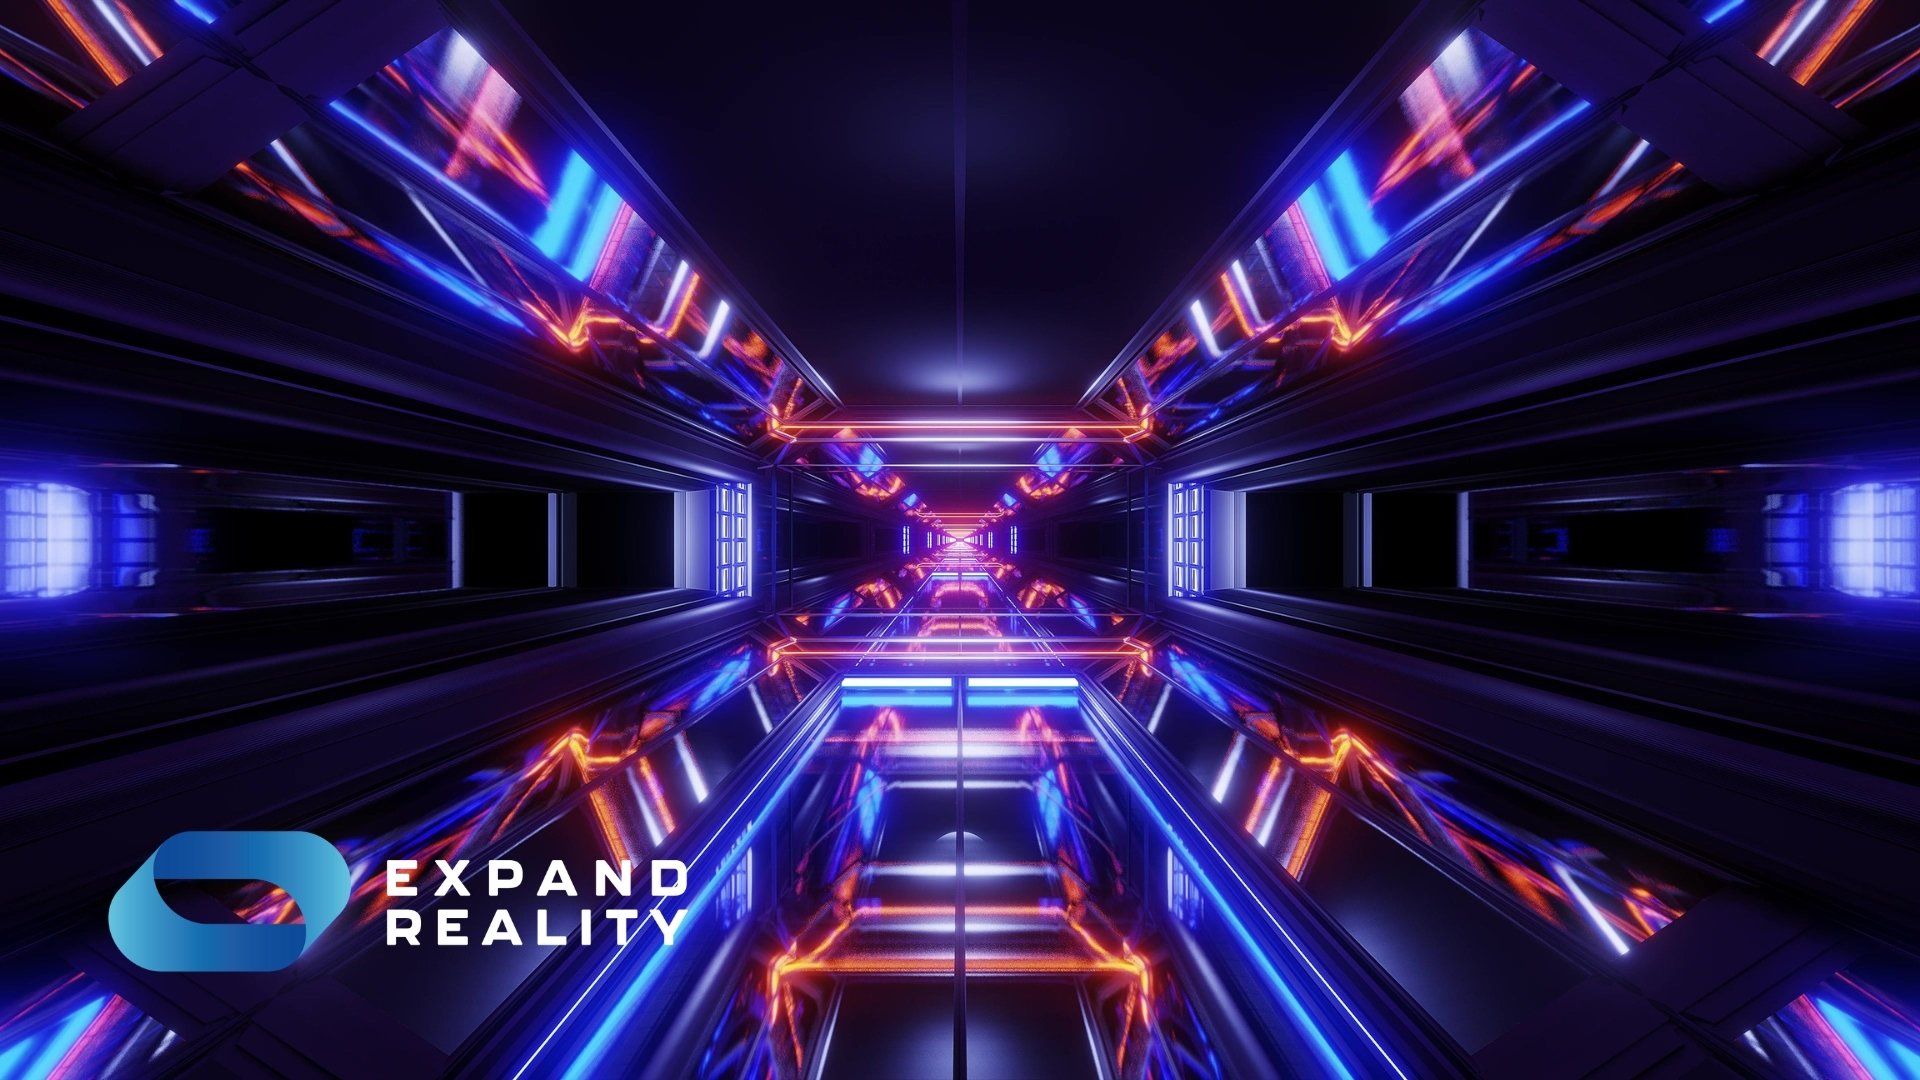 Extended reality (XR) technology is fast gaining steam. But where, exactly, is it heading? Get the answers from some of the most trusted industry experts.